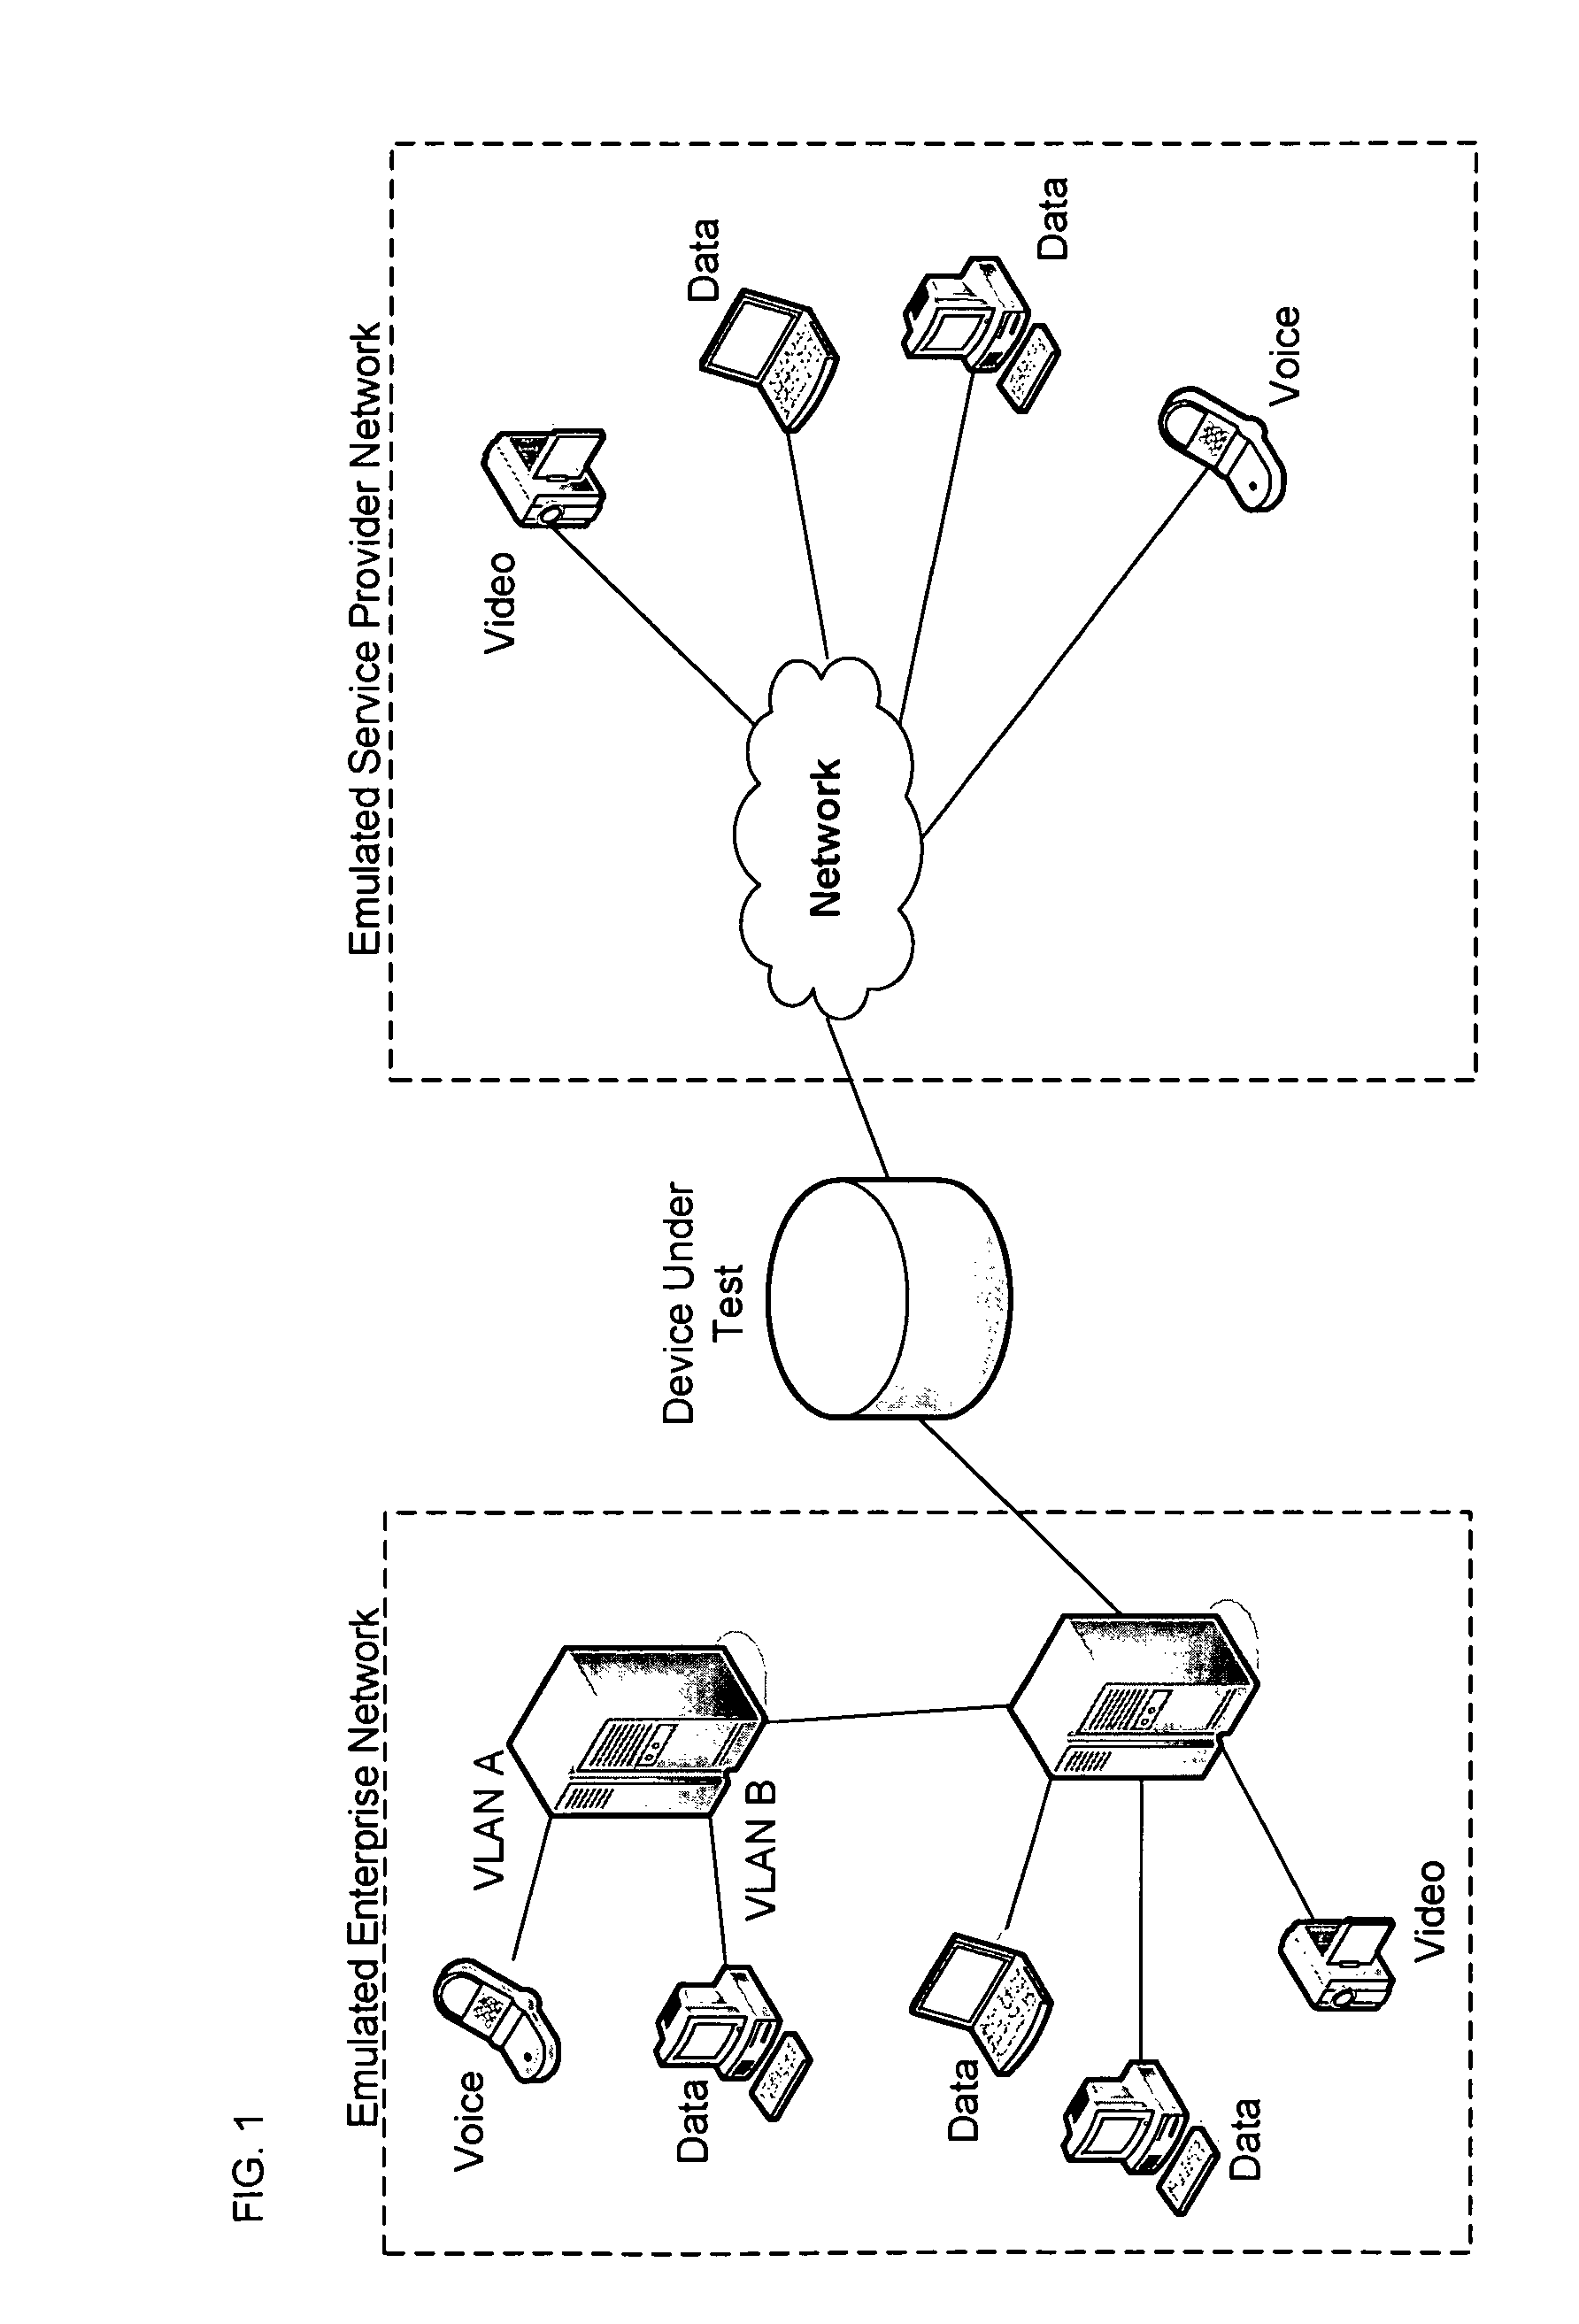 Method and device test data streams bound to emulated devices